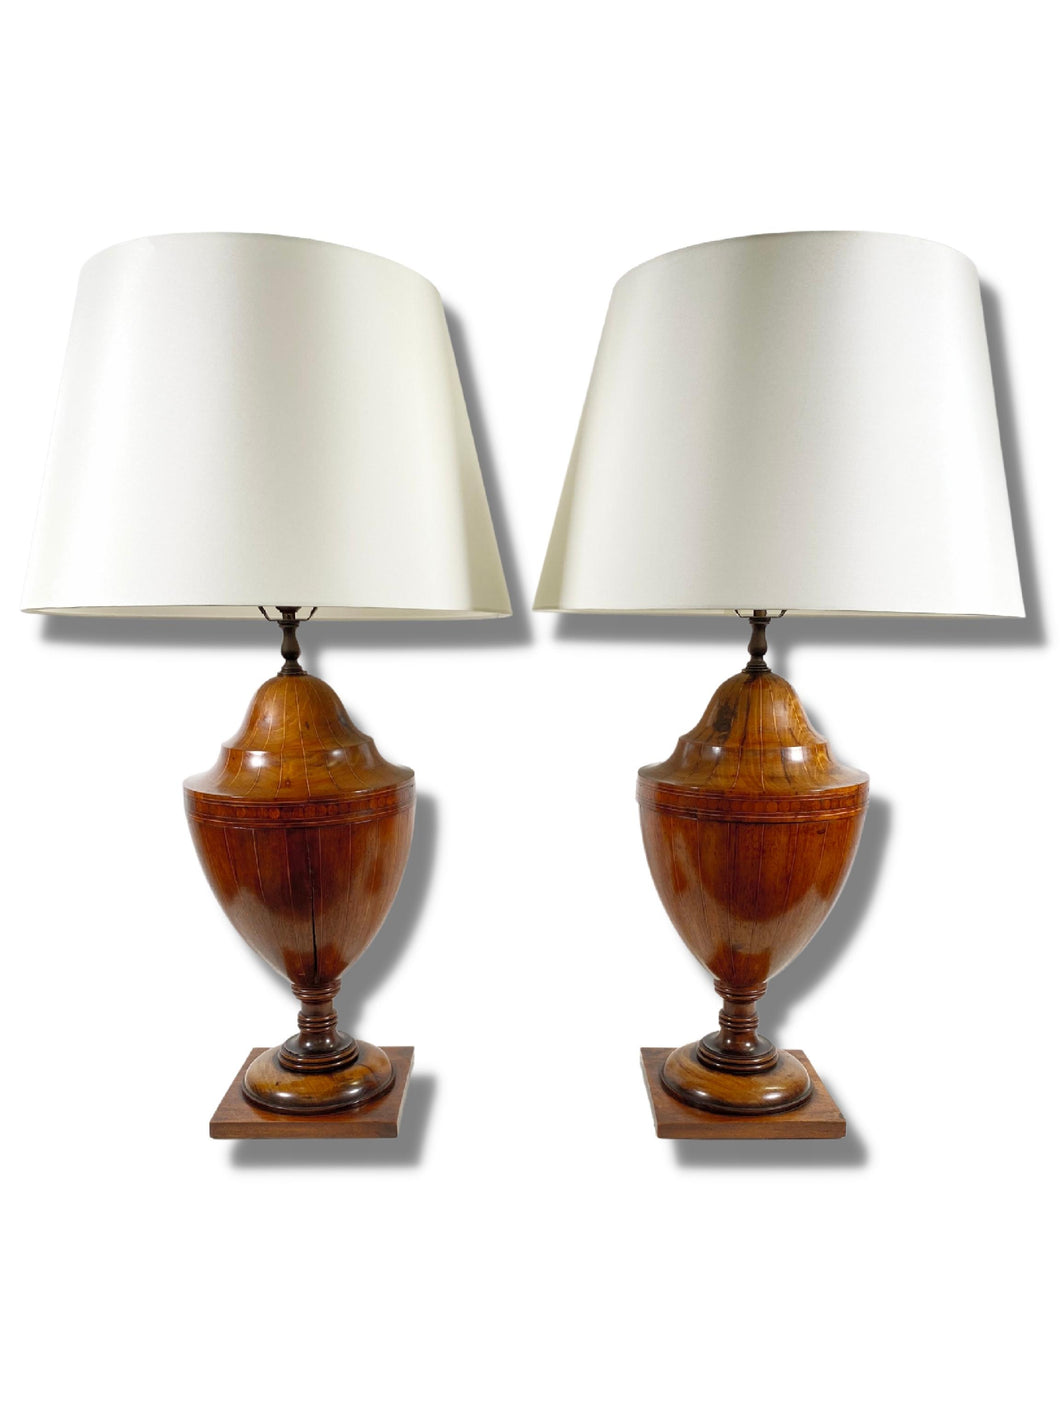 Federal Knife Boxes Fitted as Lamps (Pair)